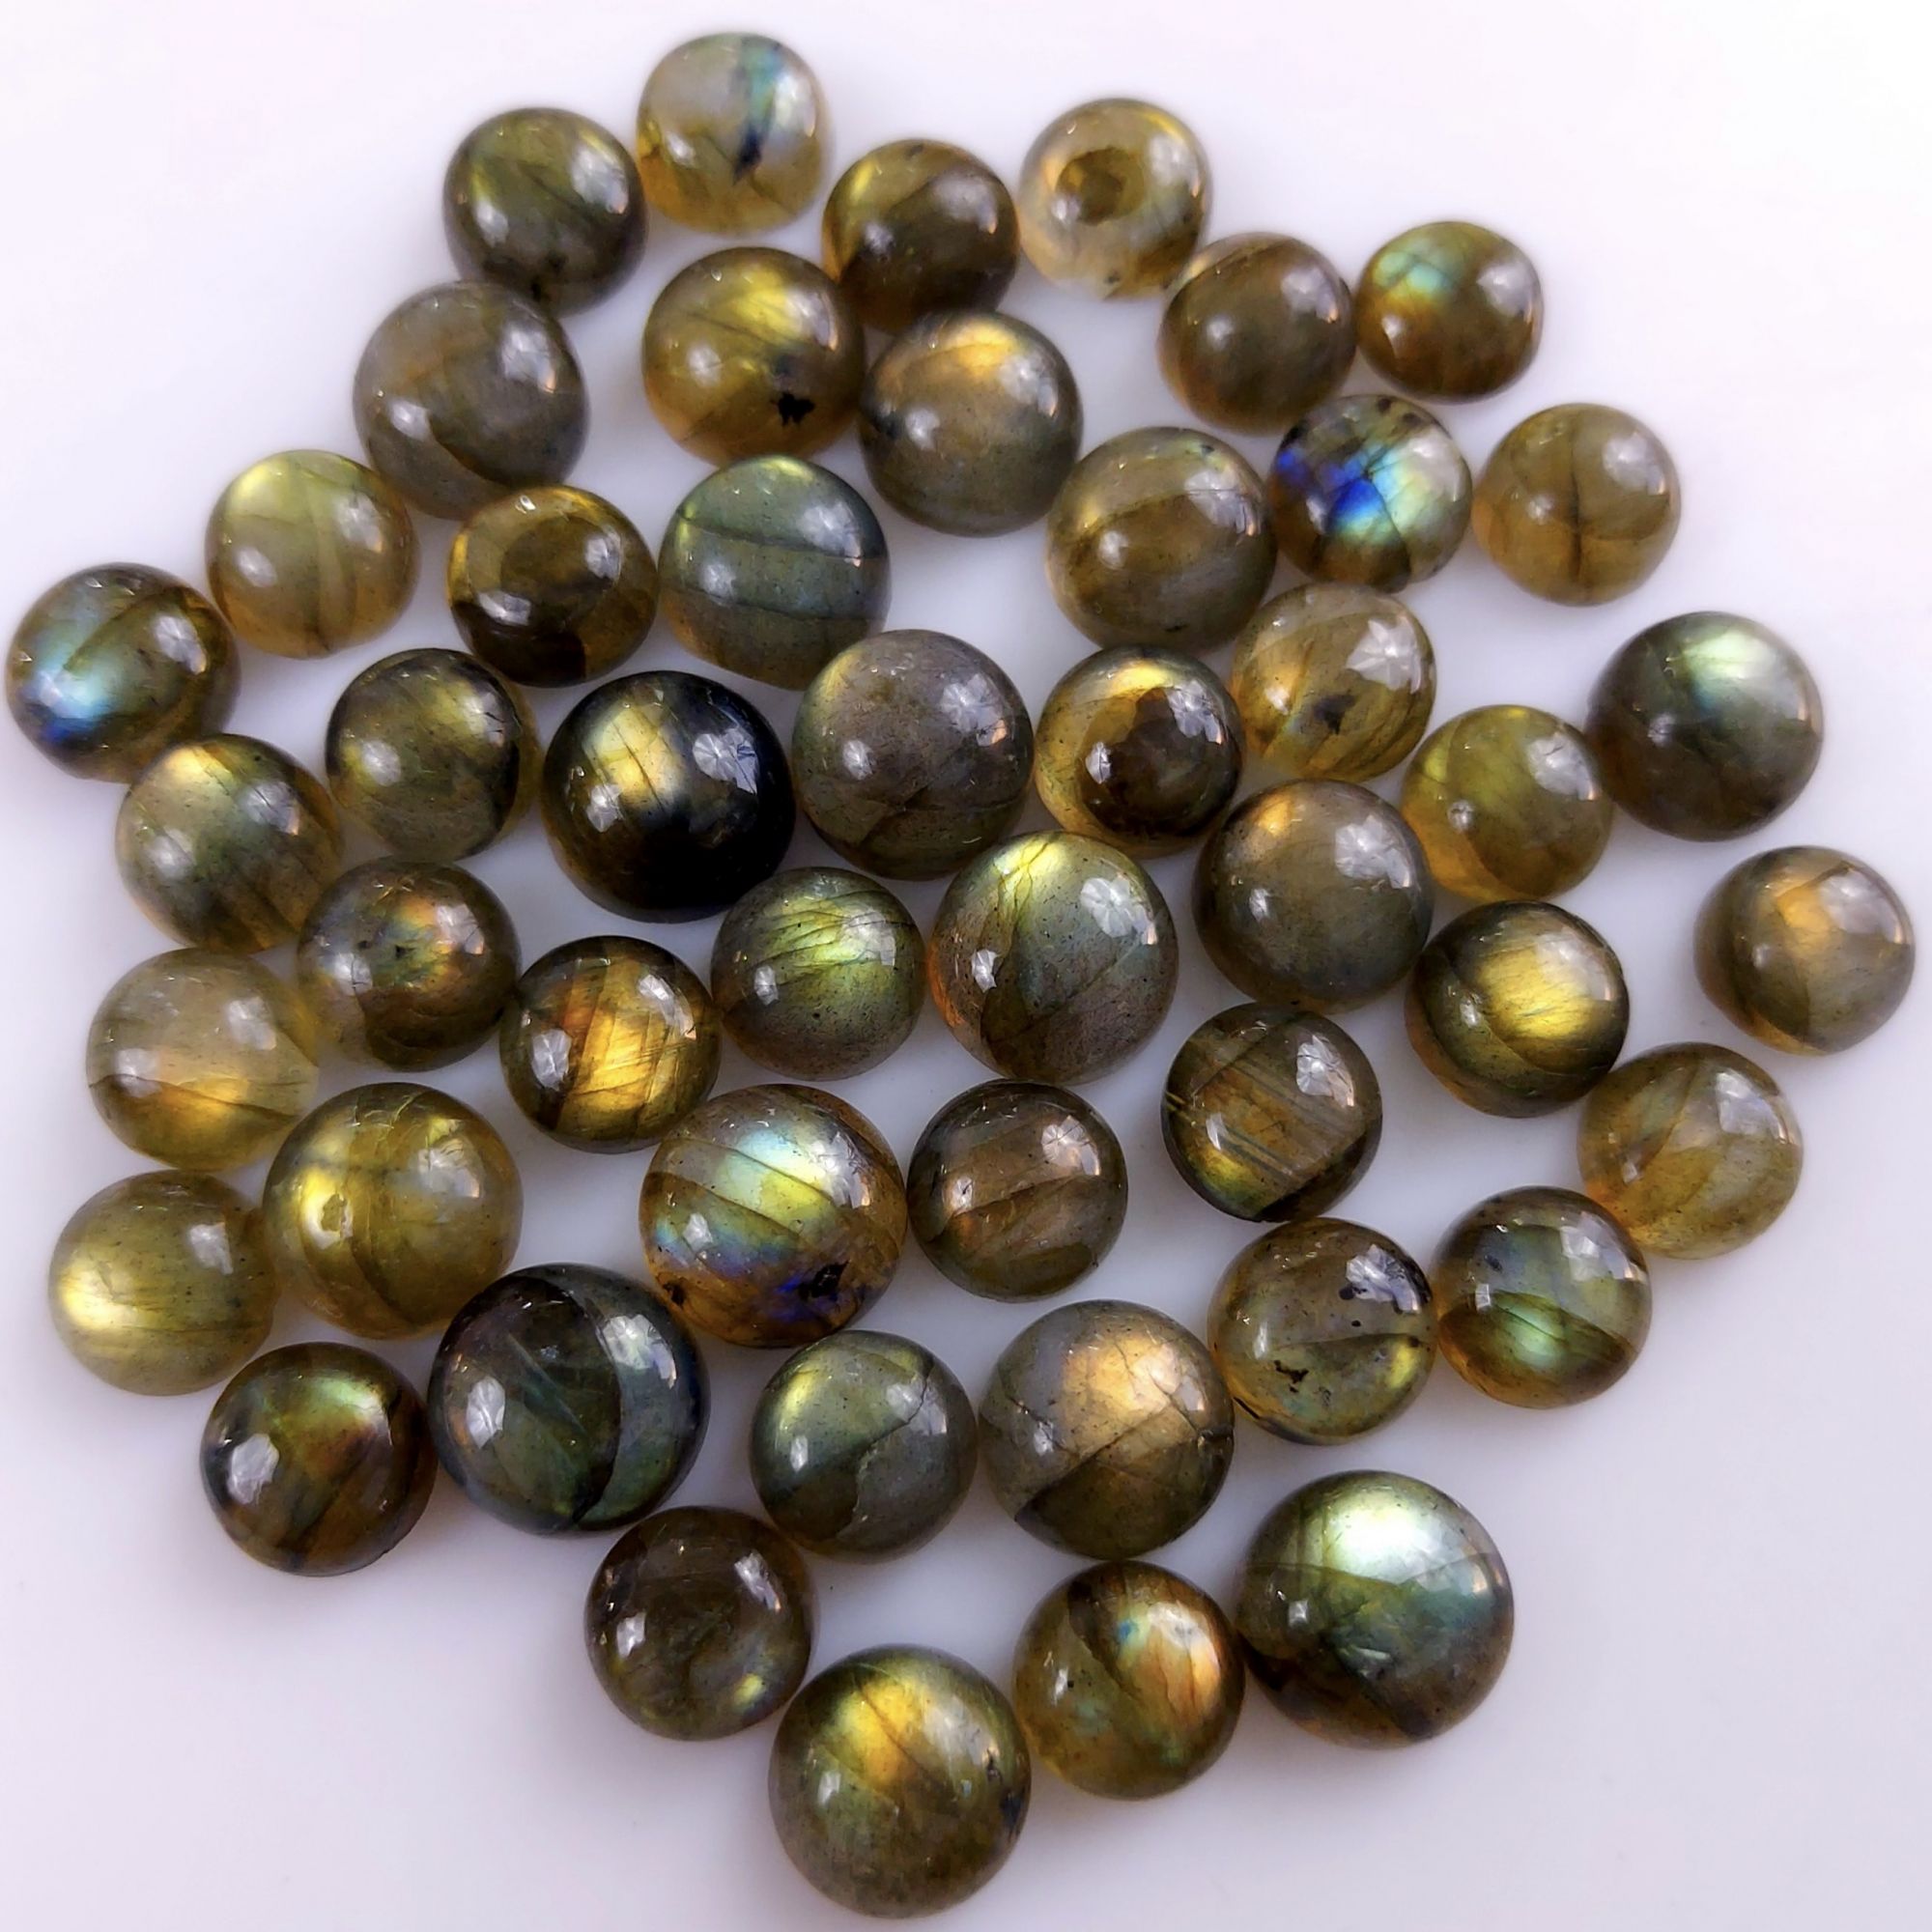 48 Pcs133Cts Natural Multifire Labradorite Loose Cabochon Round Gemstone Lot for Jewelry Making  7x7 5x5mm#1064